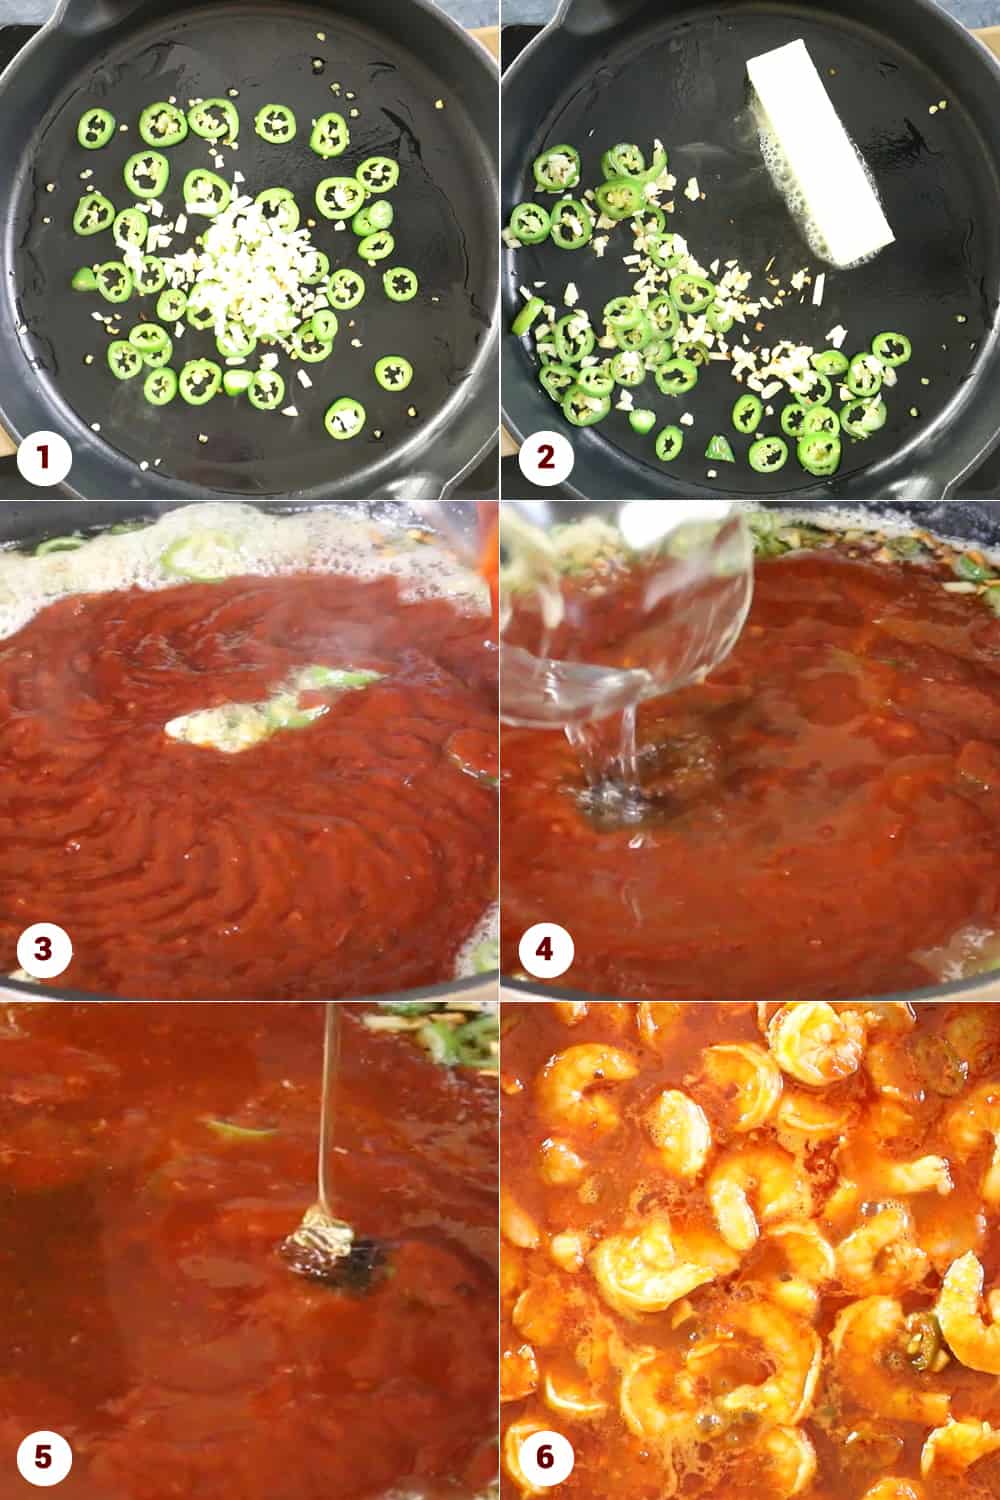 The steps to make my Shrimp in Fiery Chipotle-Tequila Sauce Recipe